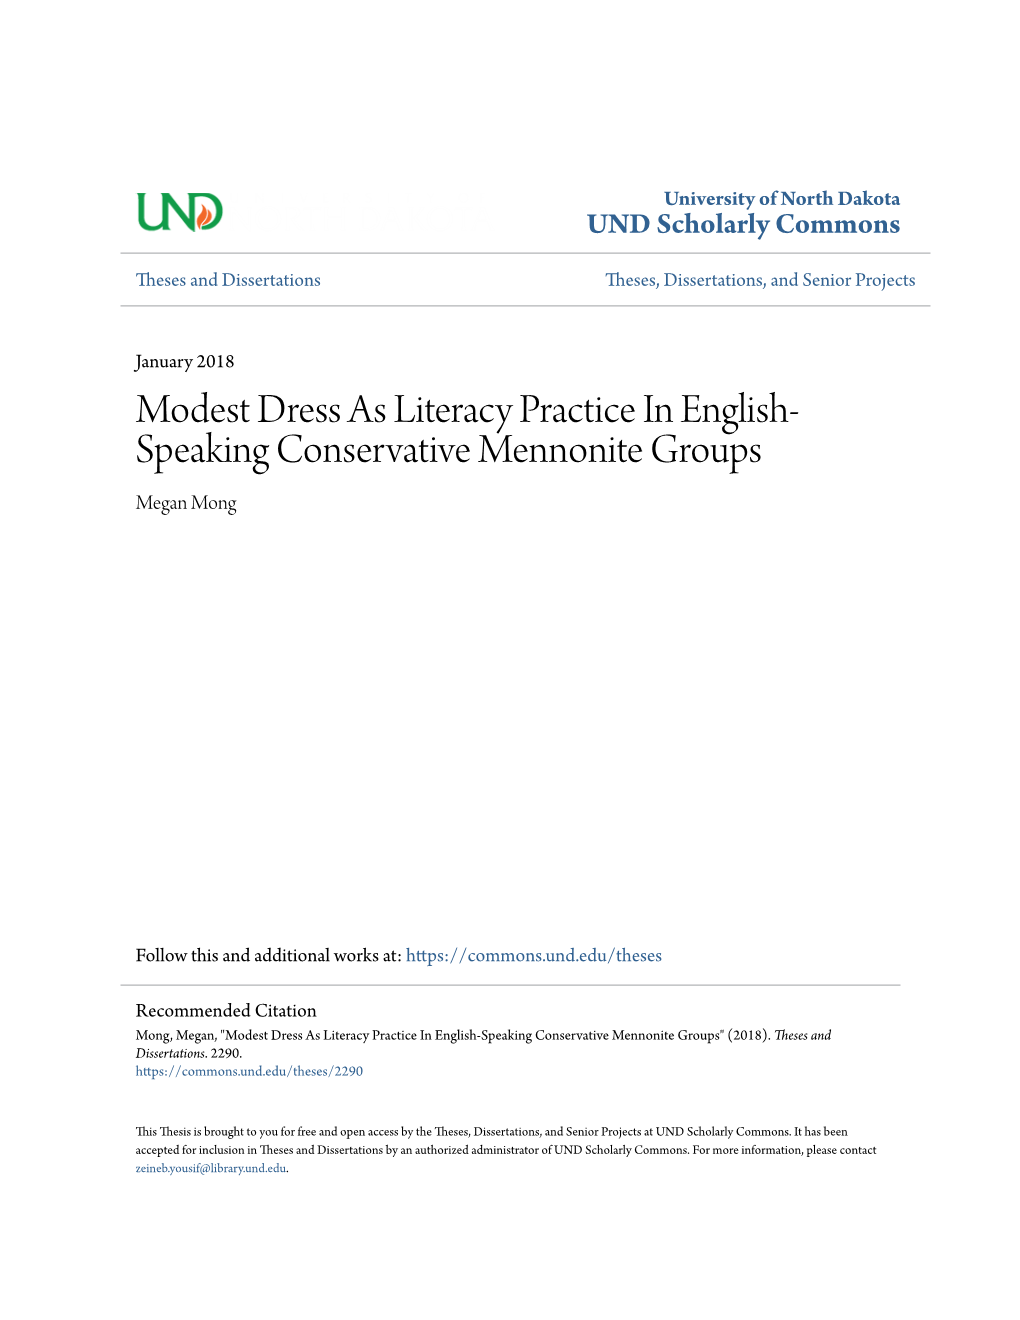 Modest Dress As Literacy Practice in English-Speaking Conservative Mennonite Groups" (2018)